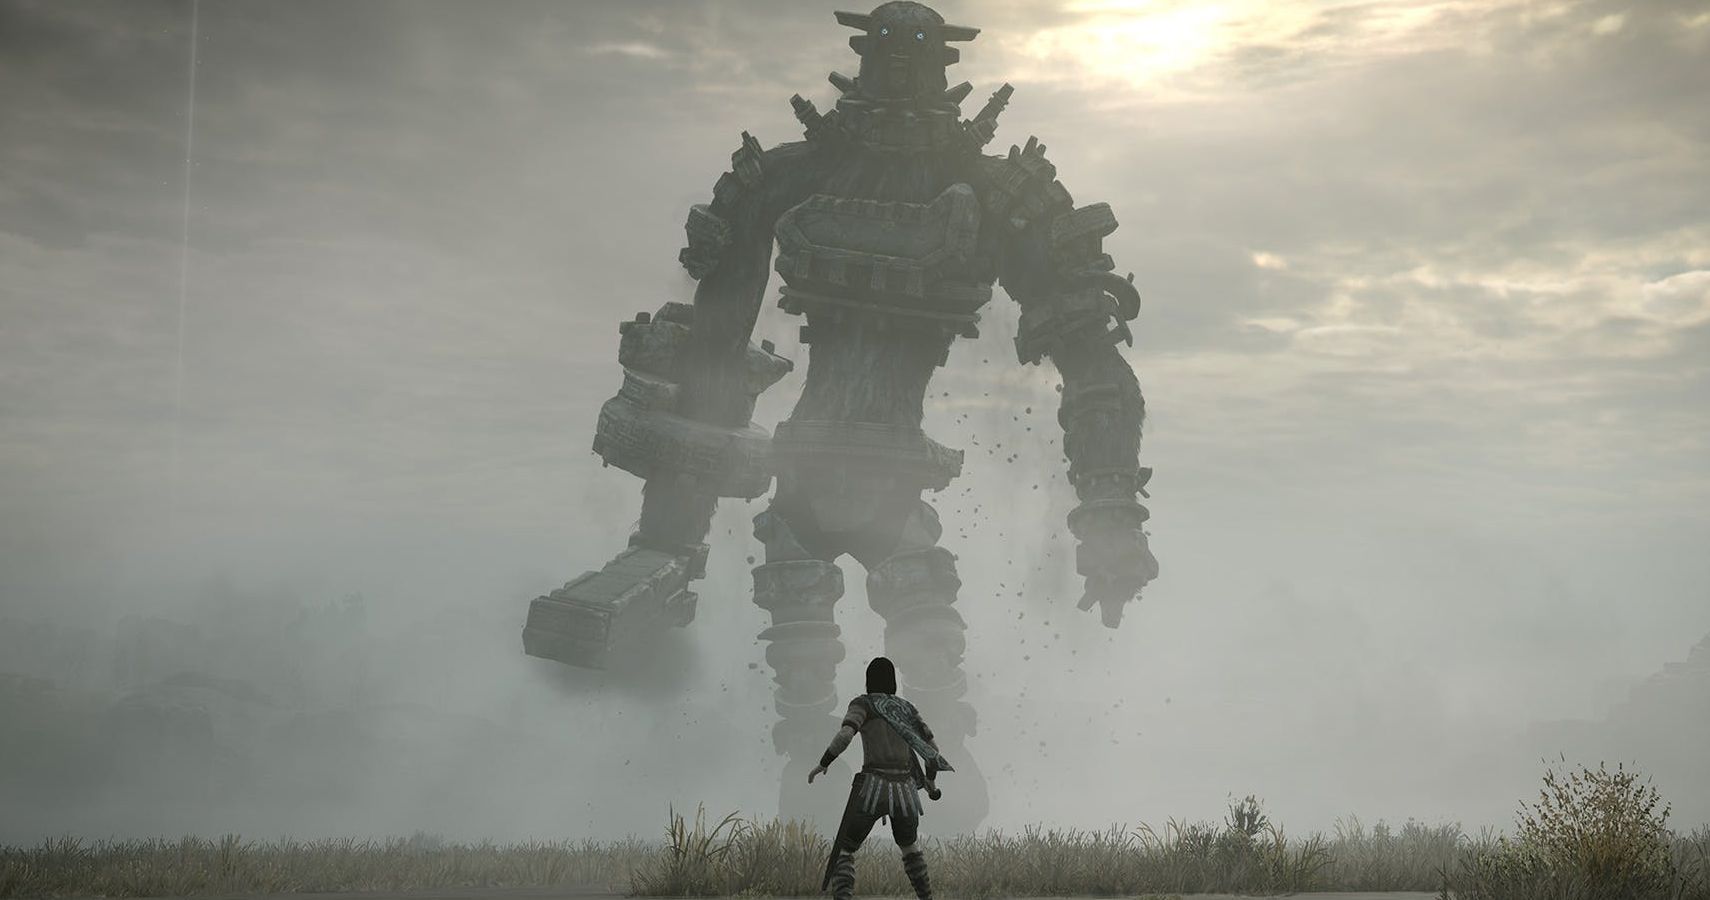 ICO/Shadow of the Colossus Collection: Here's your bonus content